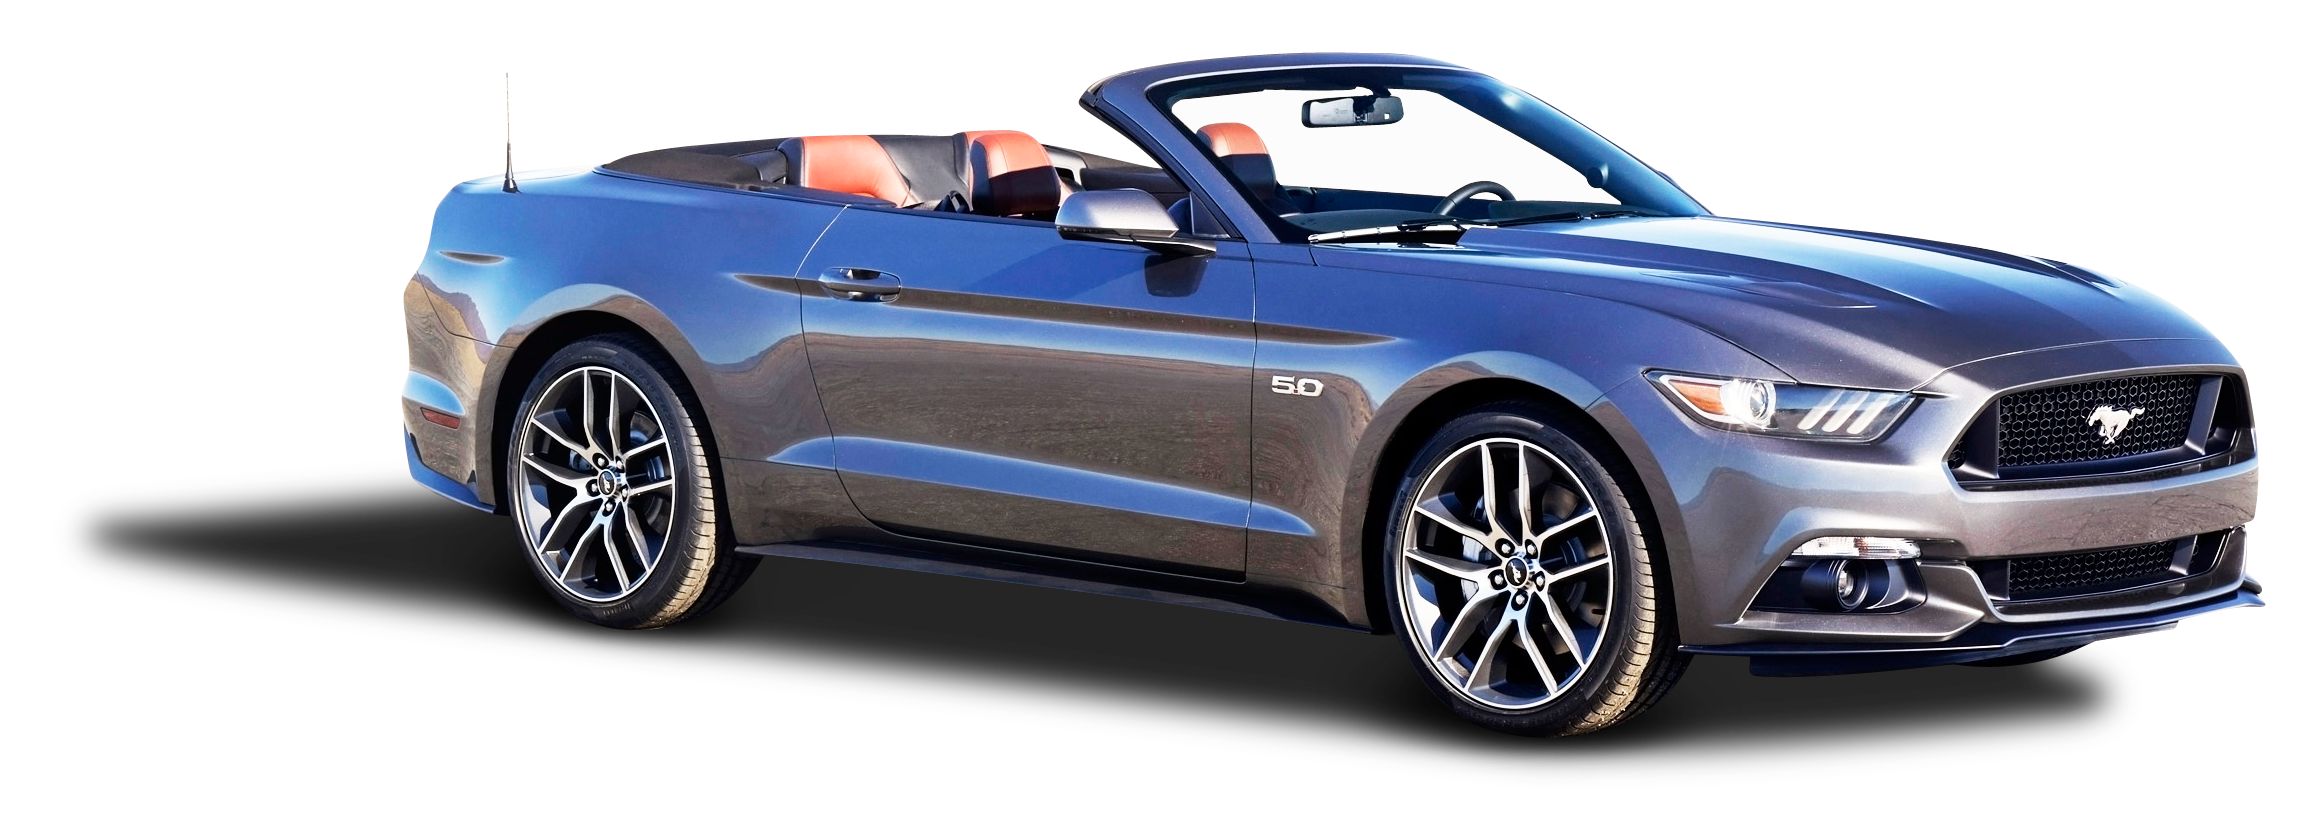 Ford Mustang Convertible Car Primo piano PNG Trasparente